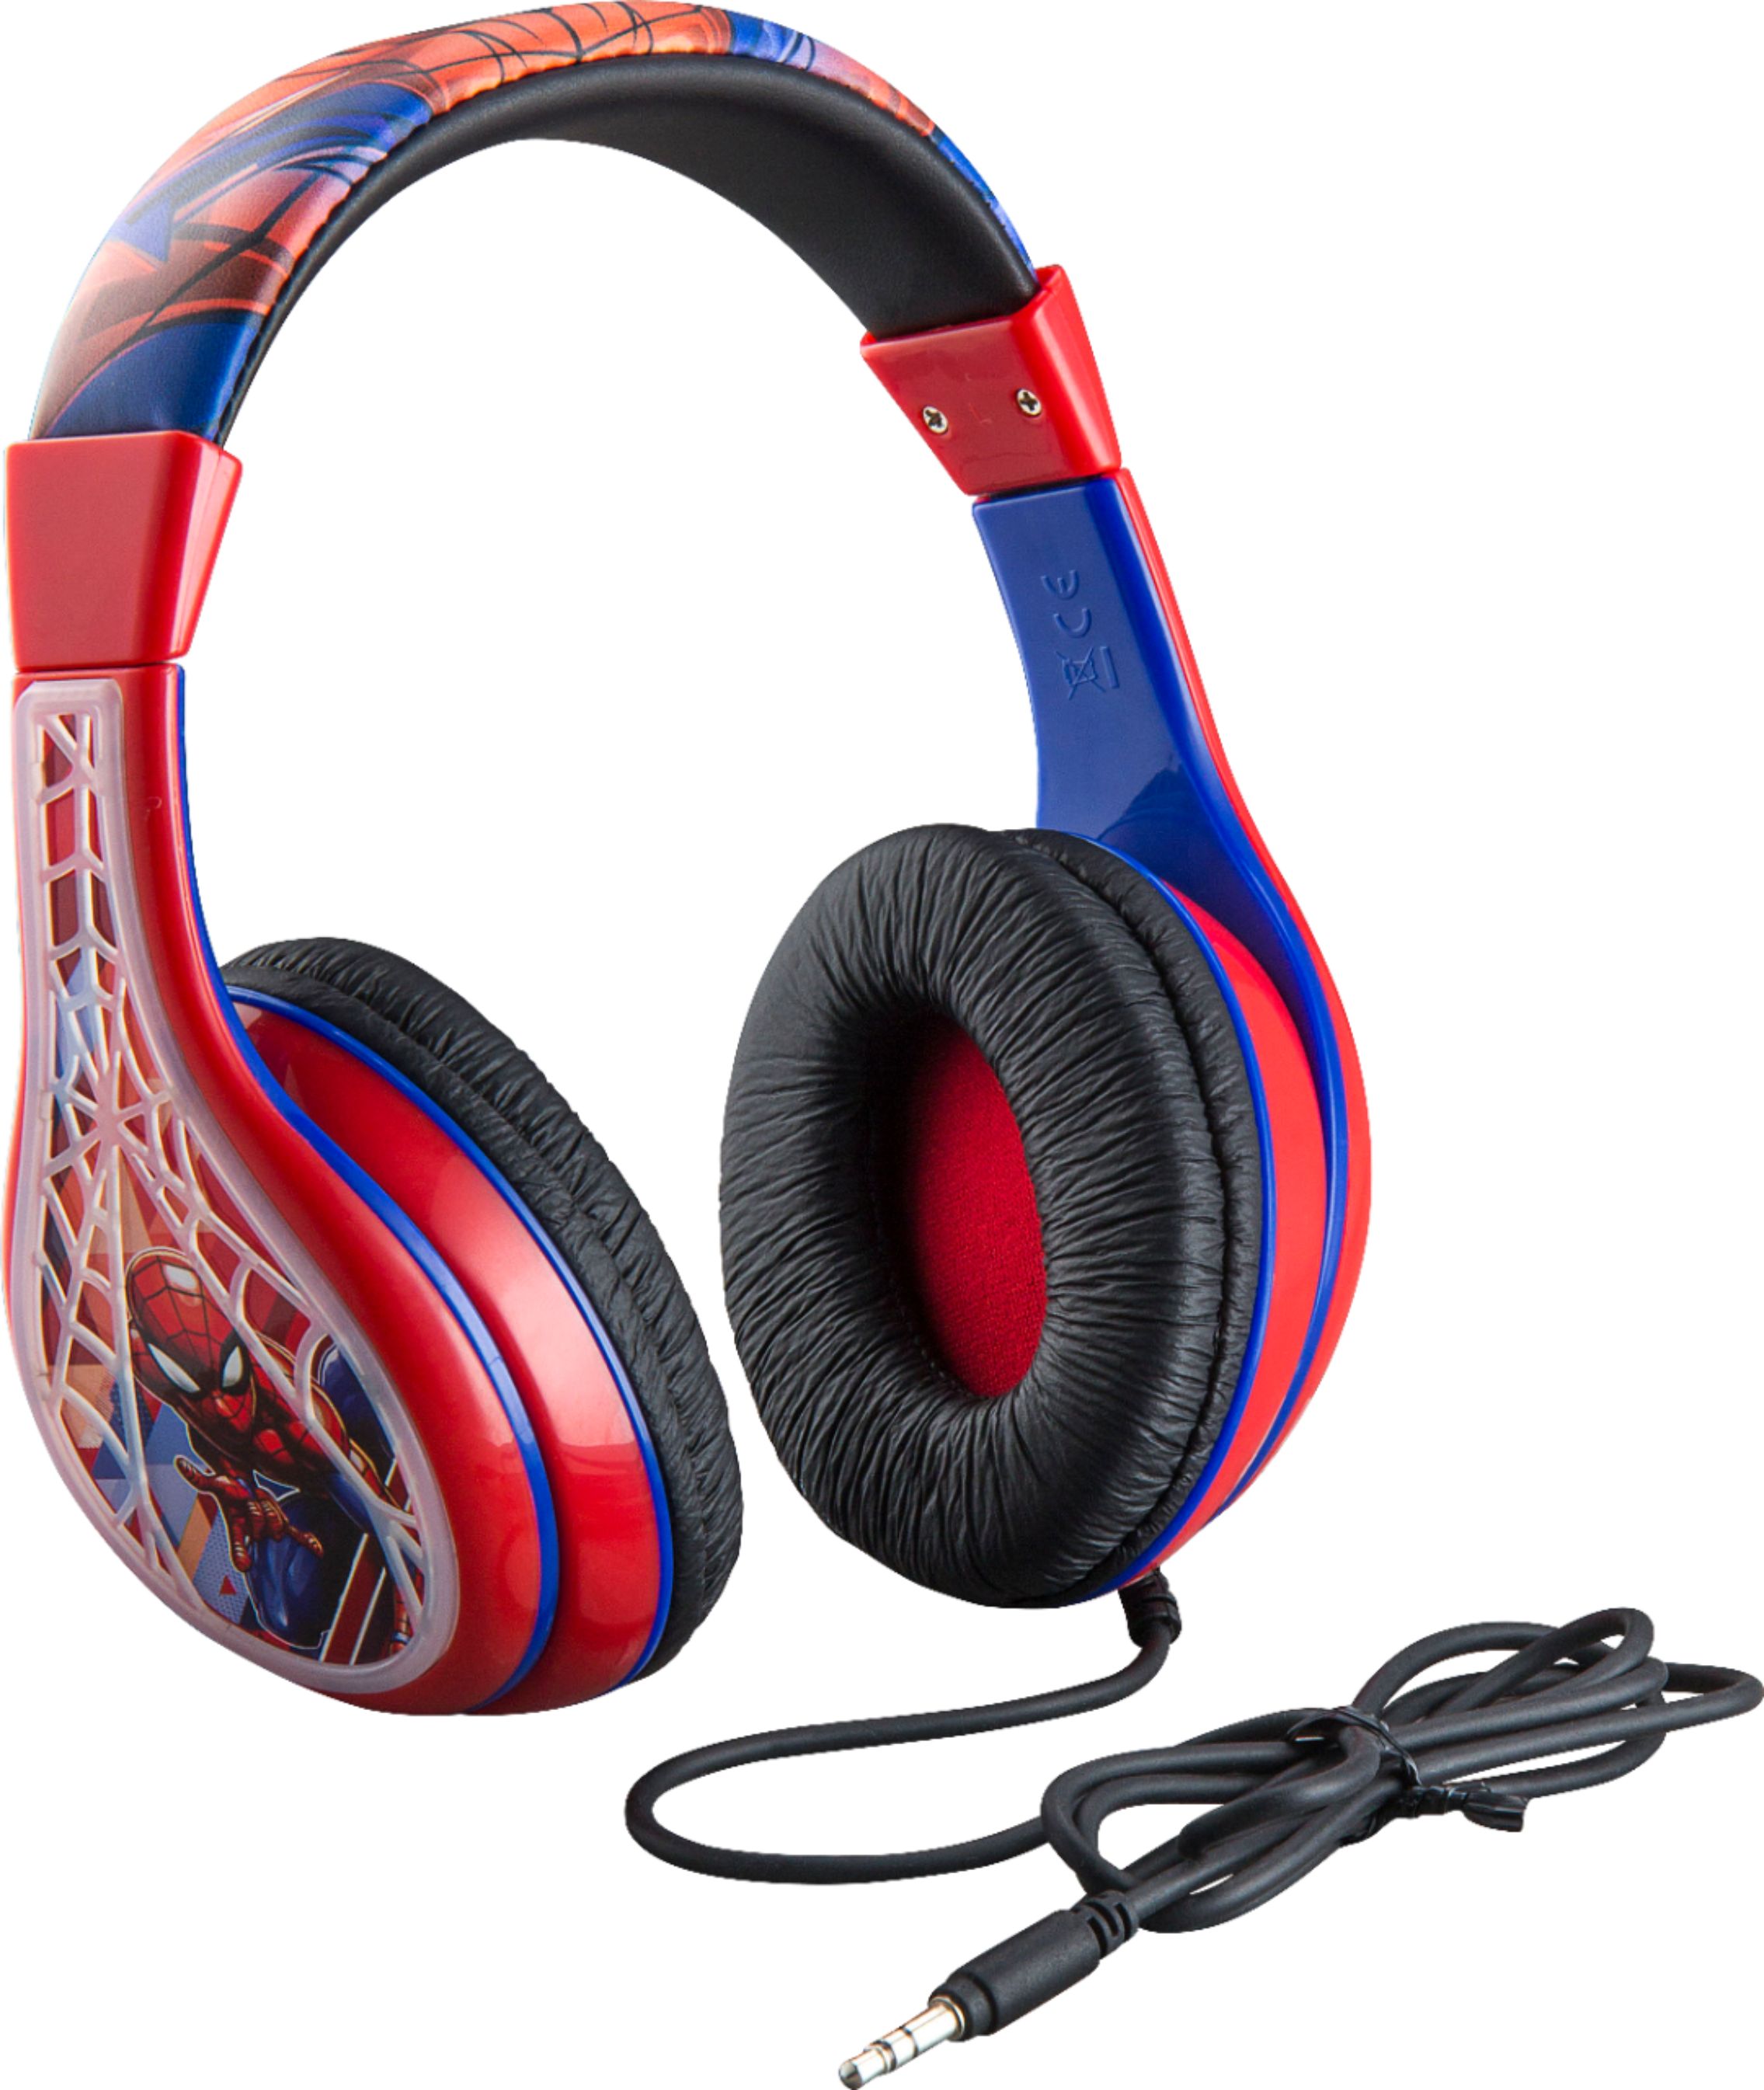 Angle View: eKids - Marvel Spider-Man Wired Over-the-Ear Headphones - Red/Blue/Black